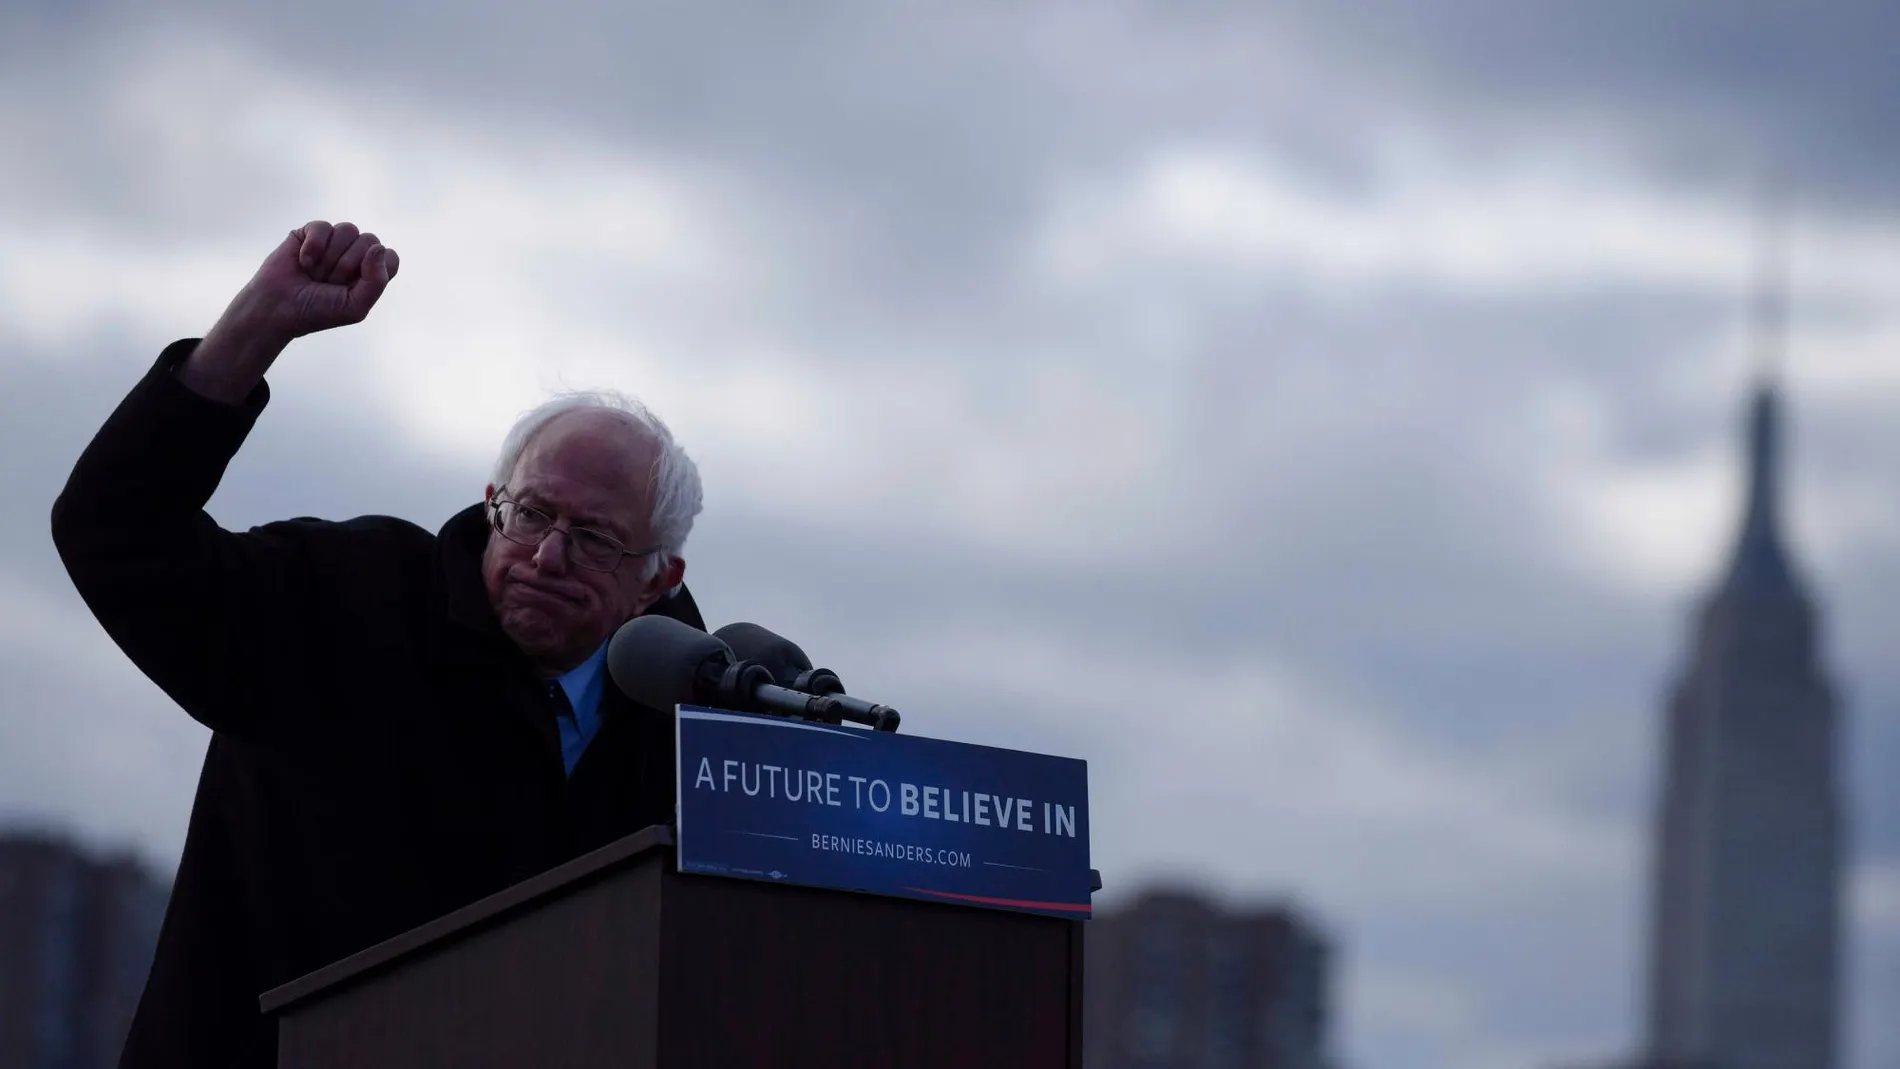 FILE PHOTO - The Empire State Building is seen in the background from Transmitter Park as U.S. Democratic presidential candidate and Senator Bernie Sanders gestures during a campaign rally in the Brooklyn borough of New York April 8, 2016. REUTERS/Darren Ornitz/File Photo REUTERS PICTURES OF THE YEAR 2016 - SEARCH 'POY 2016' TO FIND ALL IMAGES